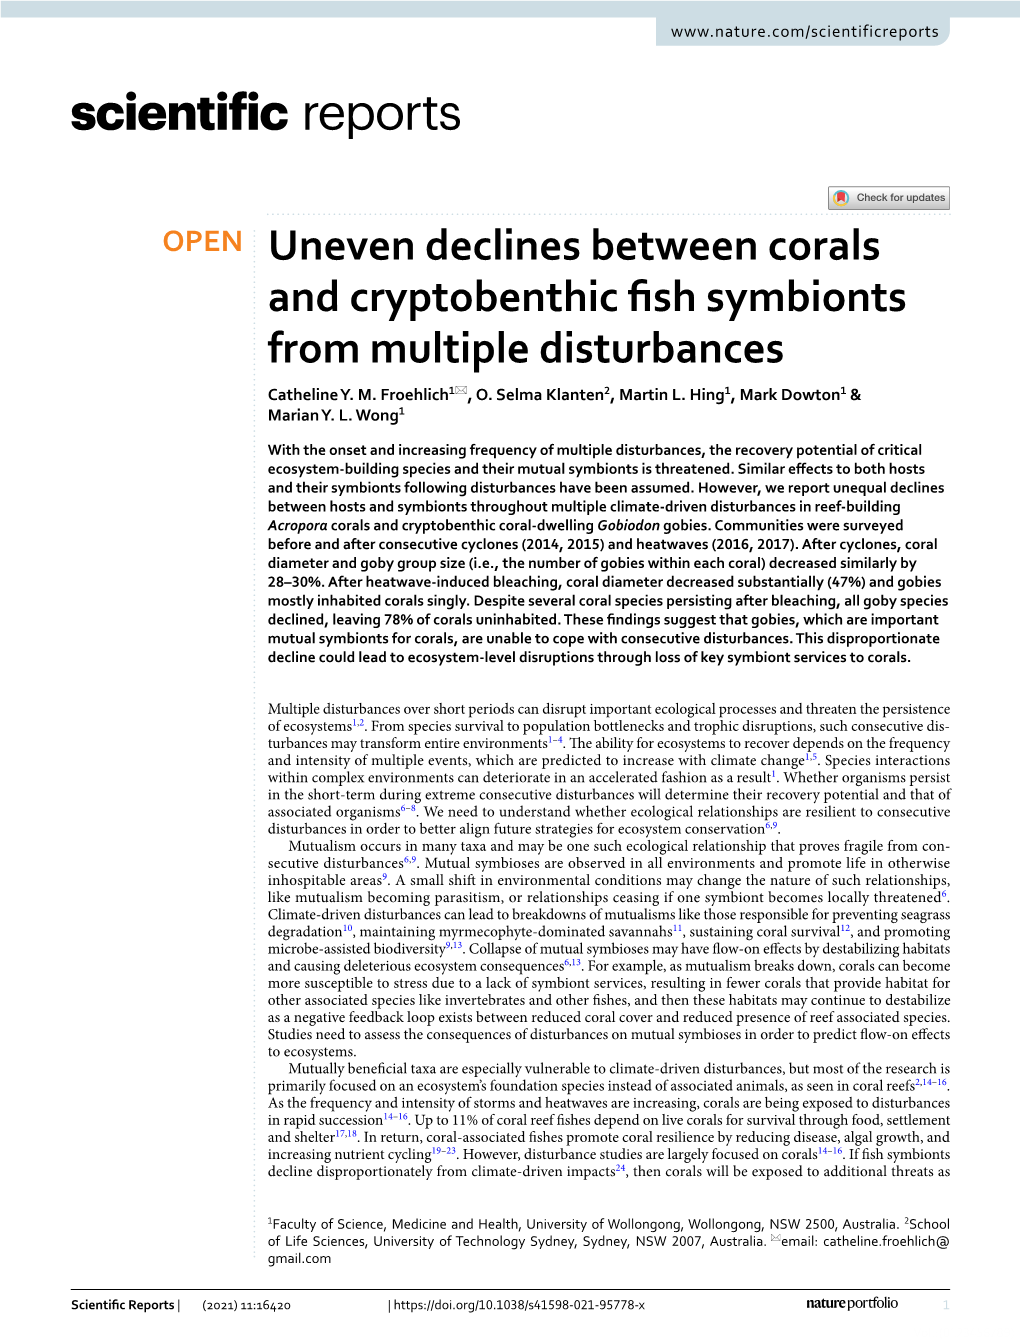 Uneven Declines Between Corals and Cryptobenthic Fish Symbionts from Multiple Disturbances